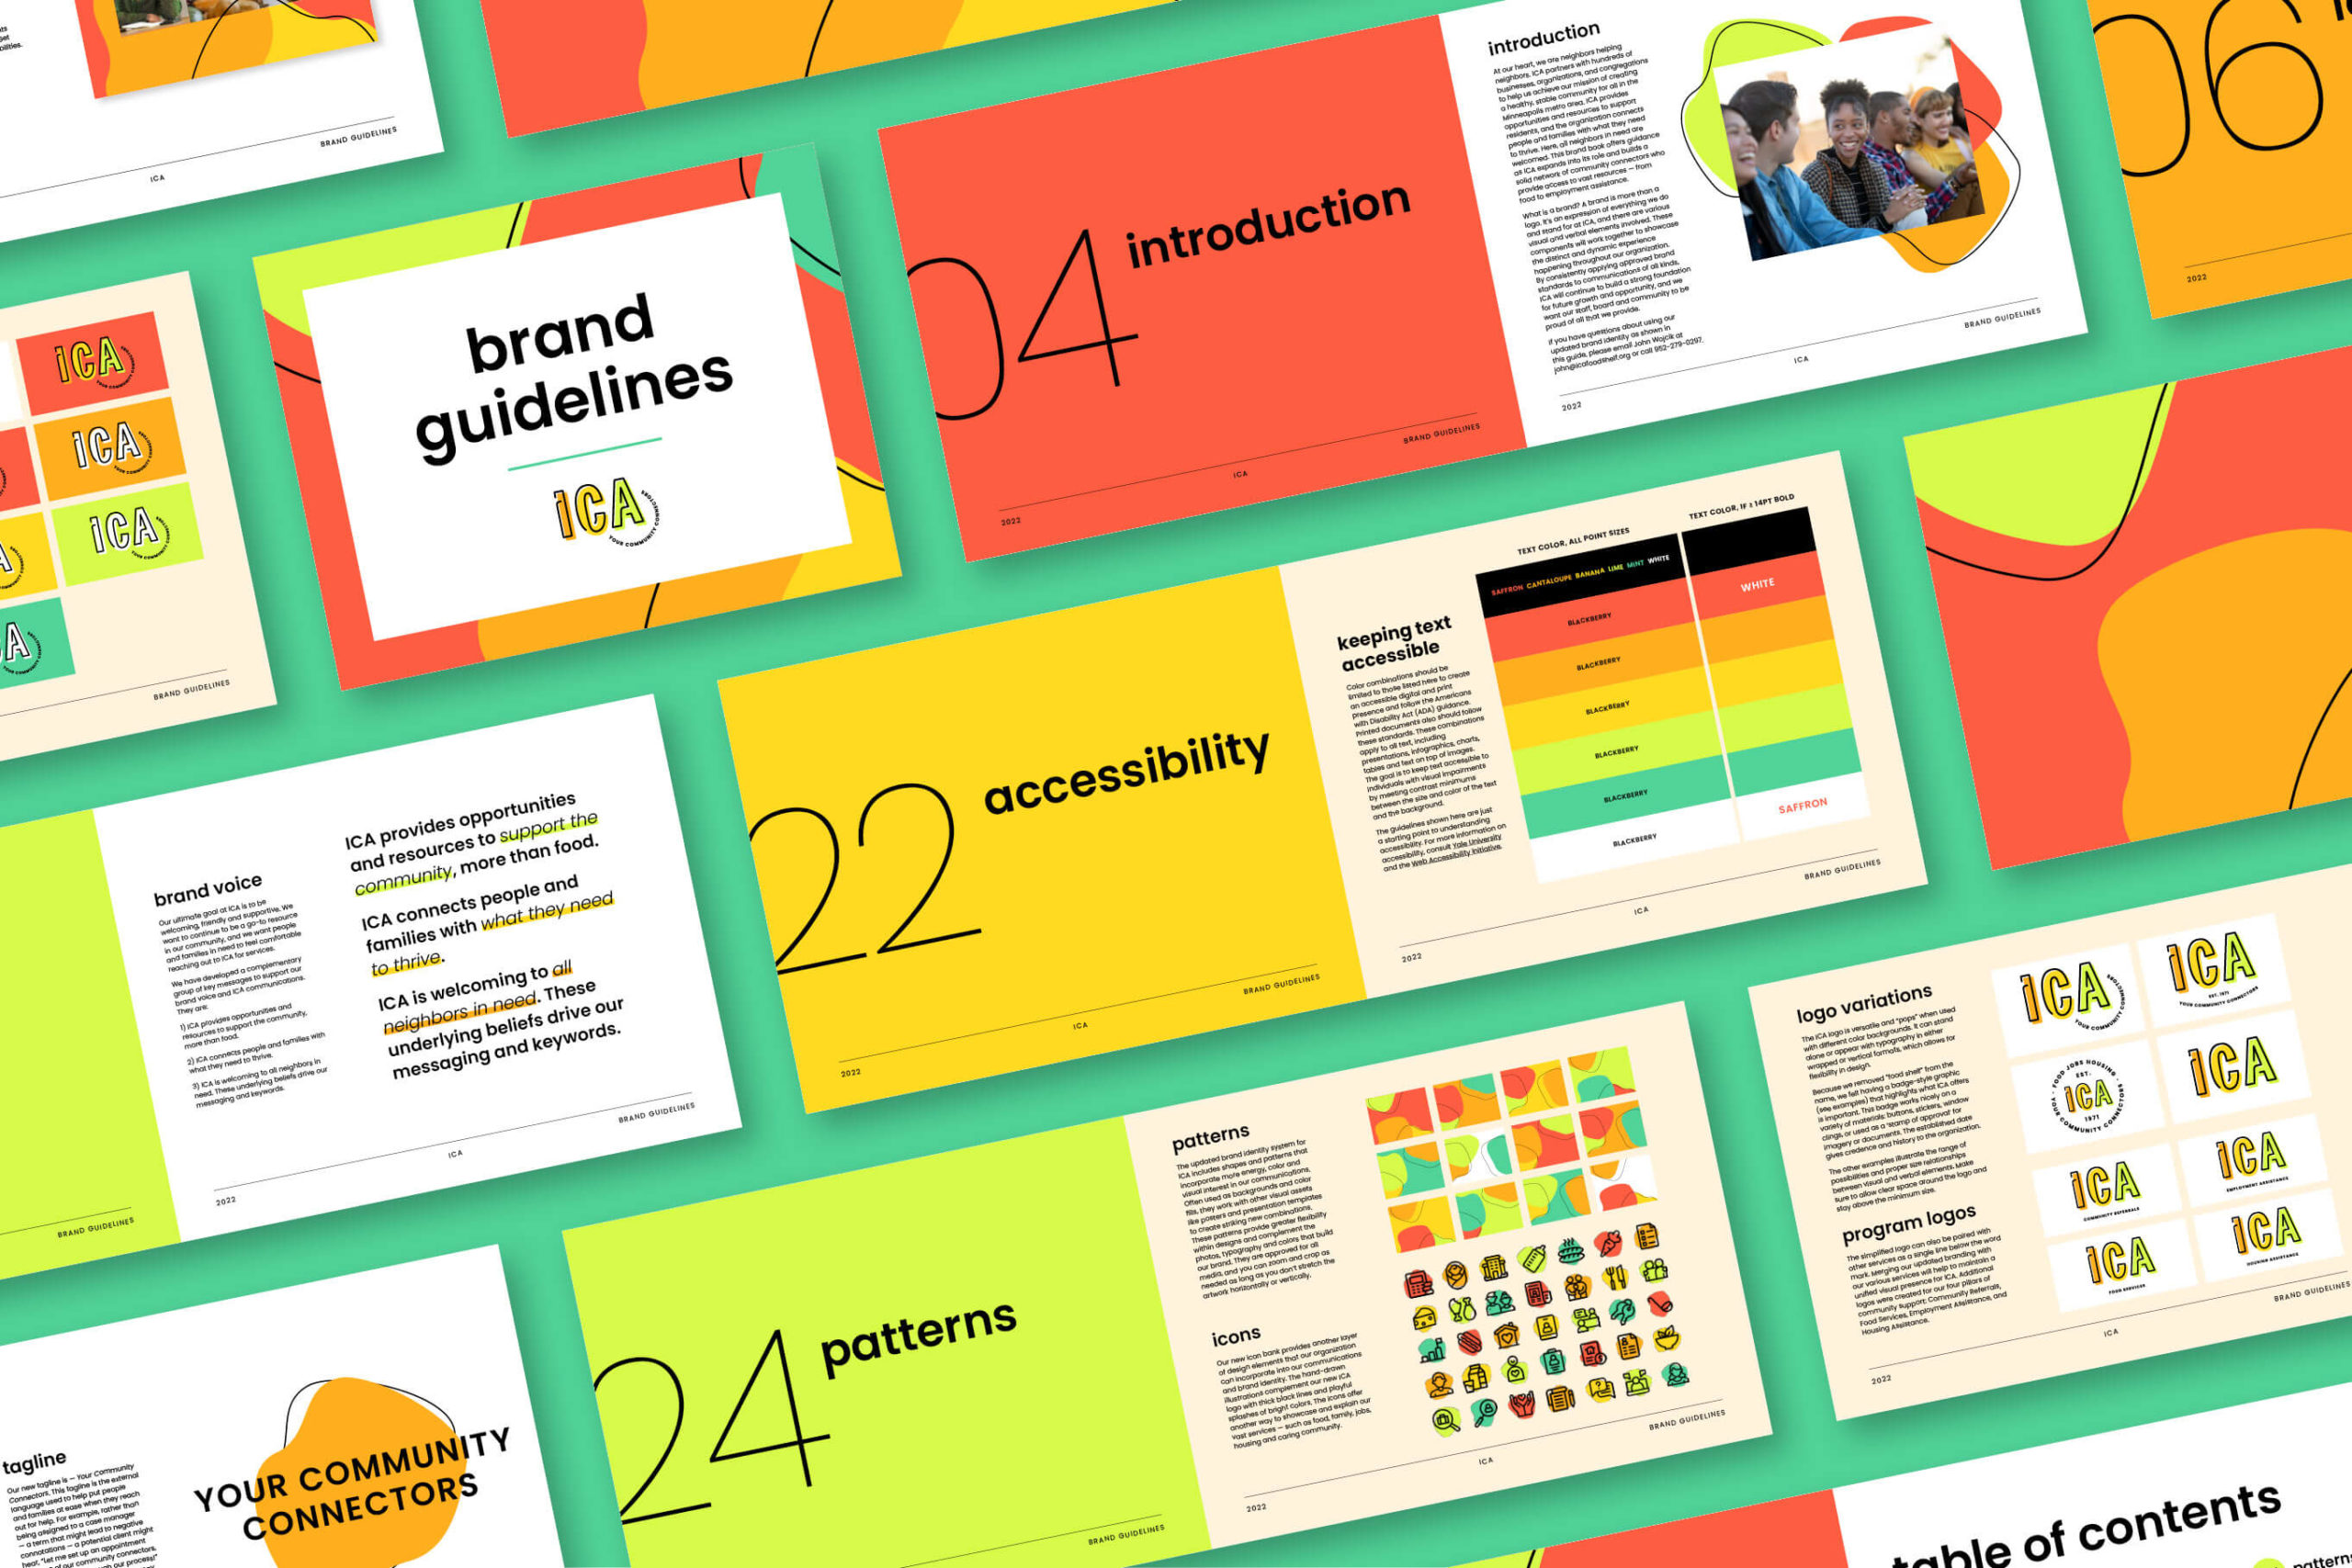 ica brand guidelines